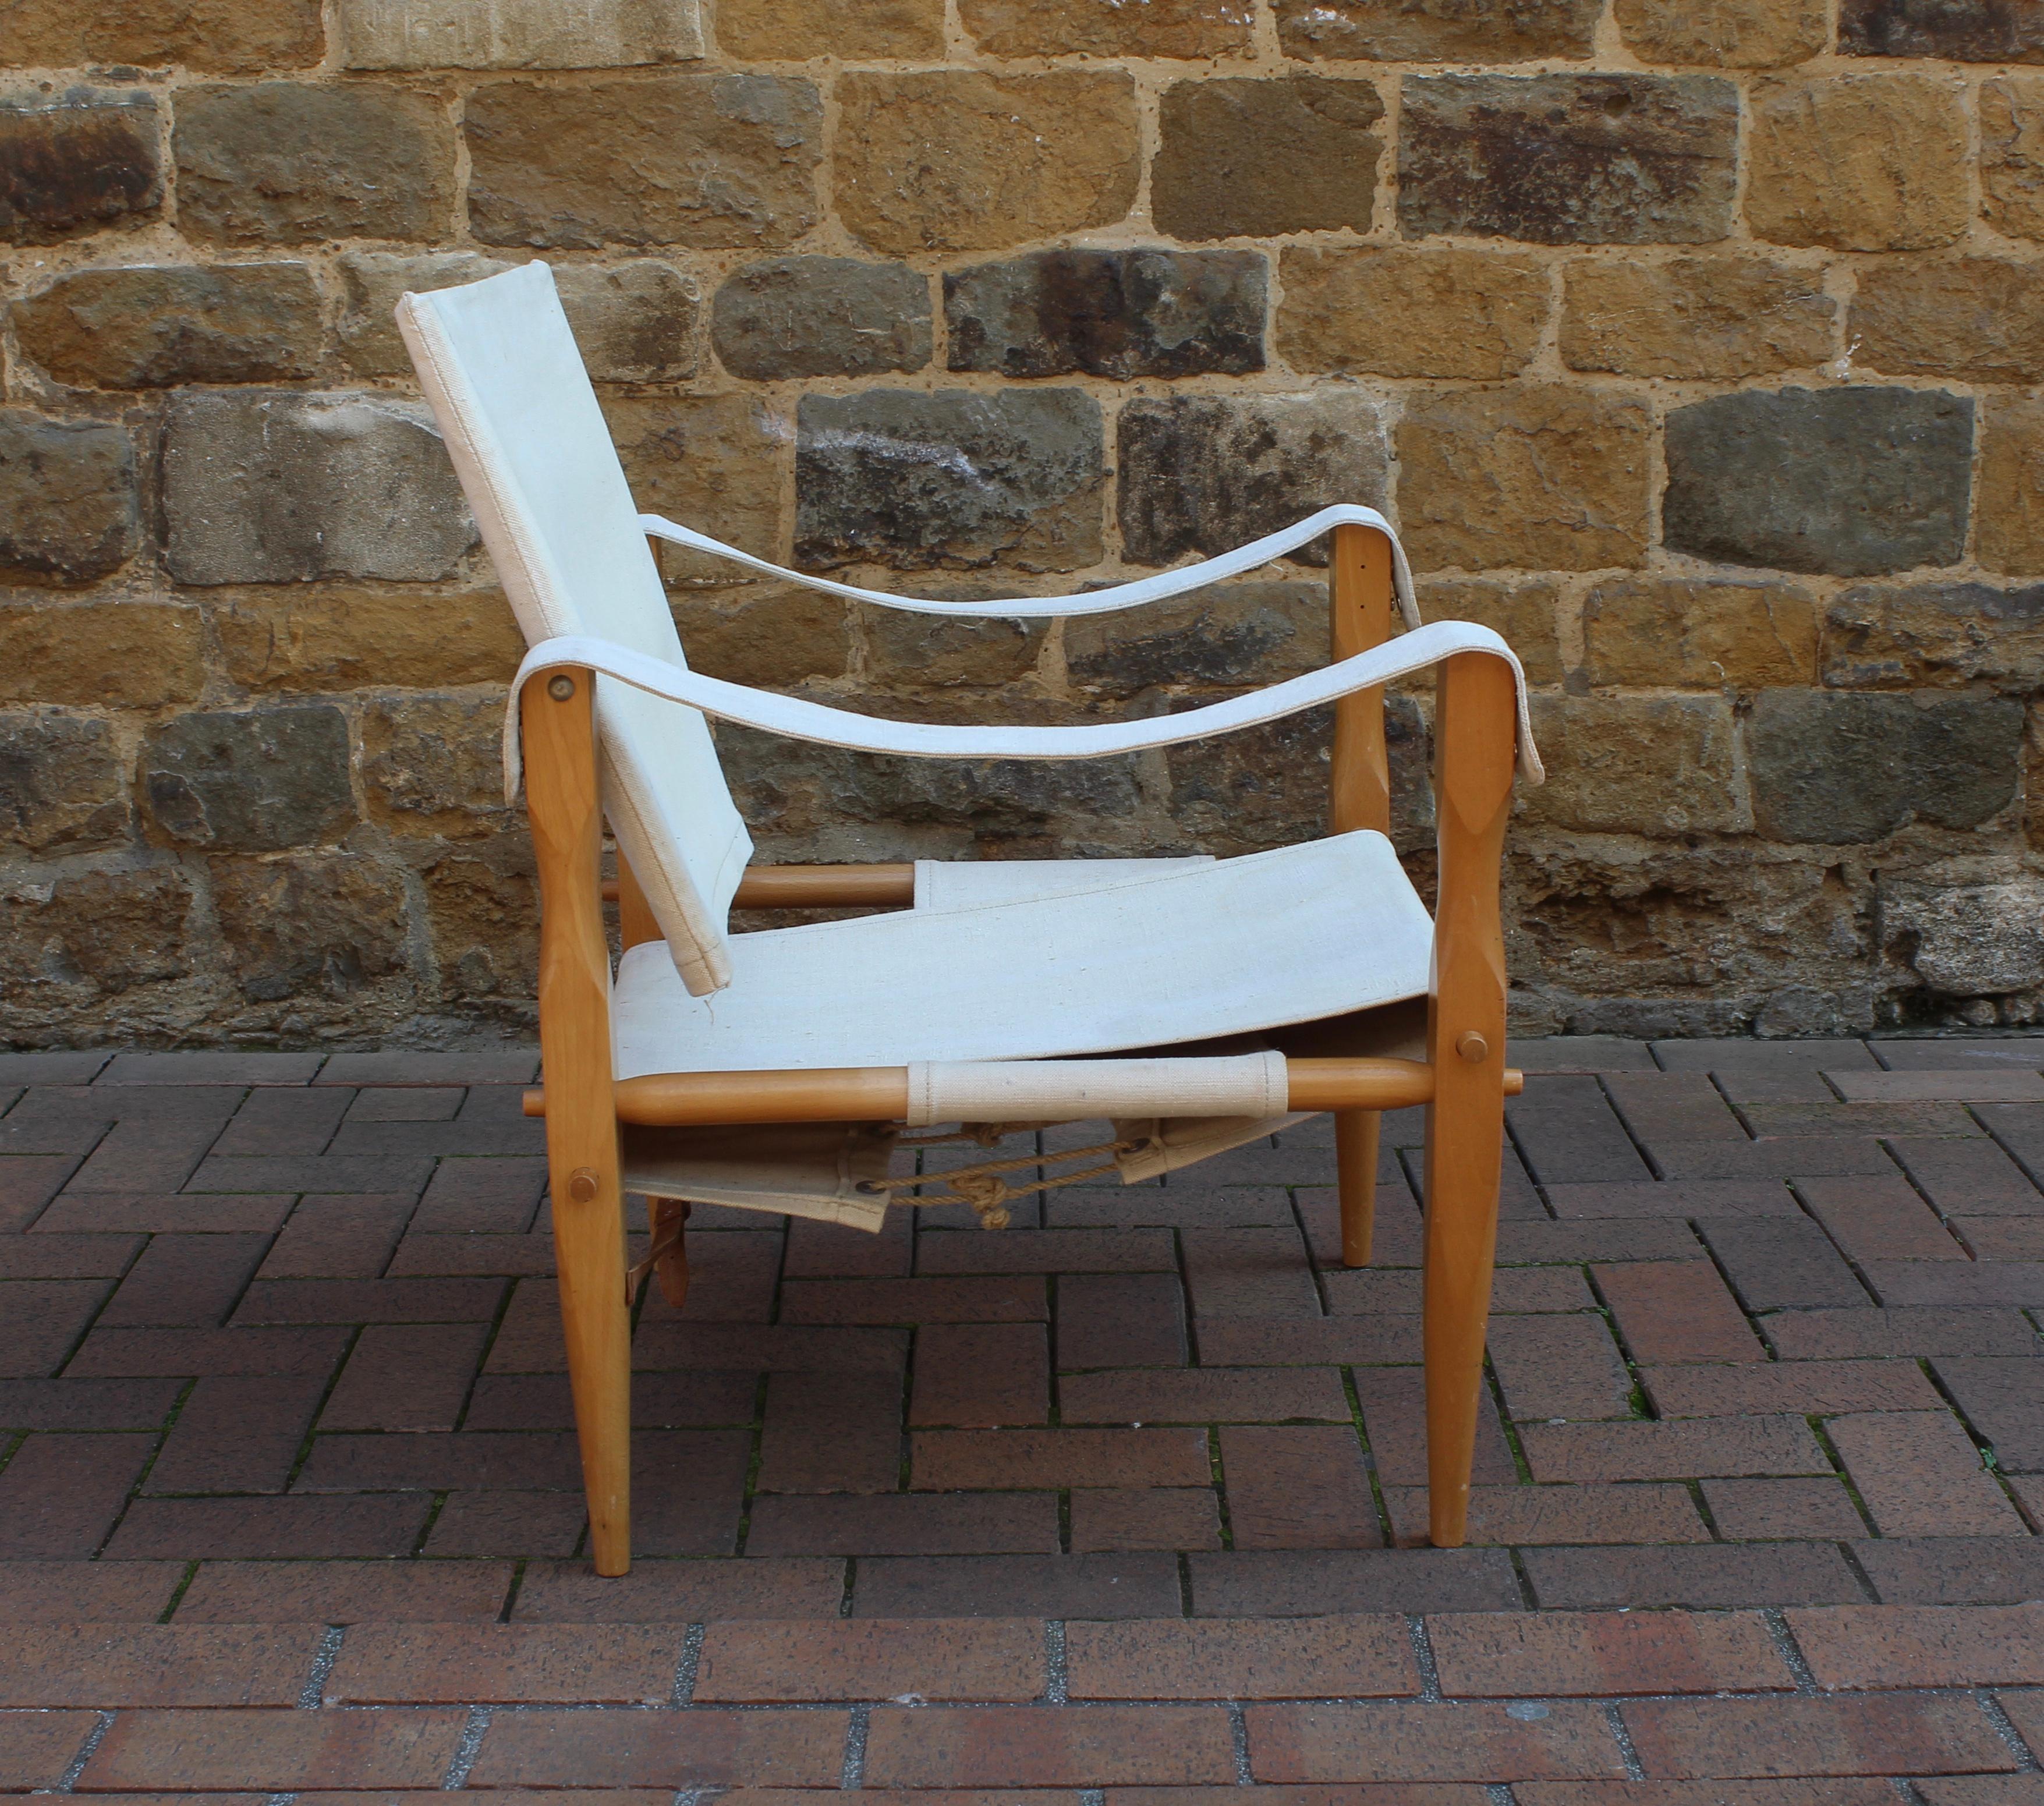 Wonderful safari chair, designed by Wilhelm Kienzle in 1928 for Wohnbedarf and manufactured in the early 1950s in Switzerland, with frame made of solid beech, covering in original cream canvass, adjustable backrest and can be completely